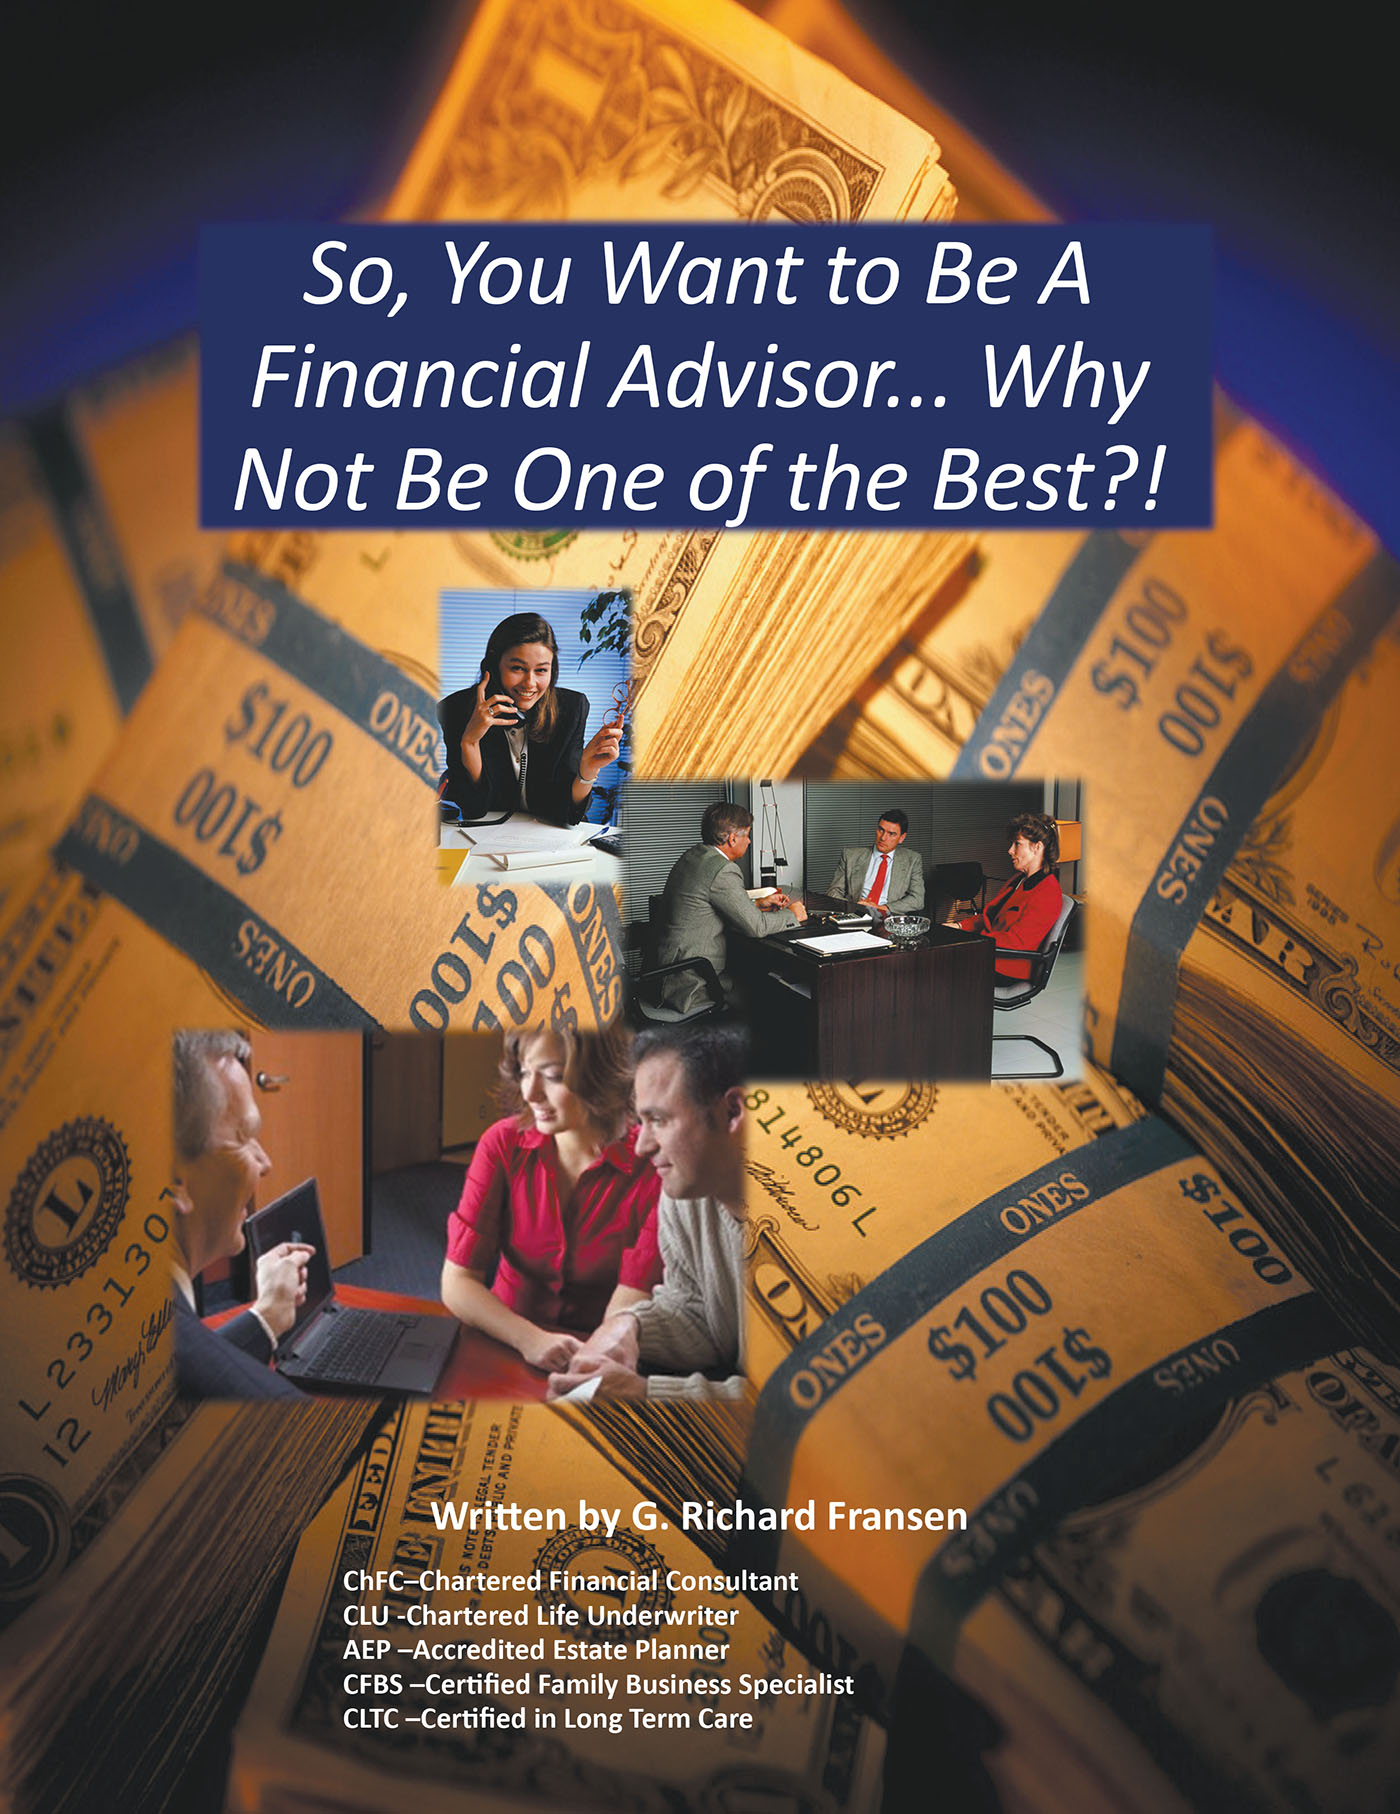 So, You Want to Be a Financial Advisor... Cover Image